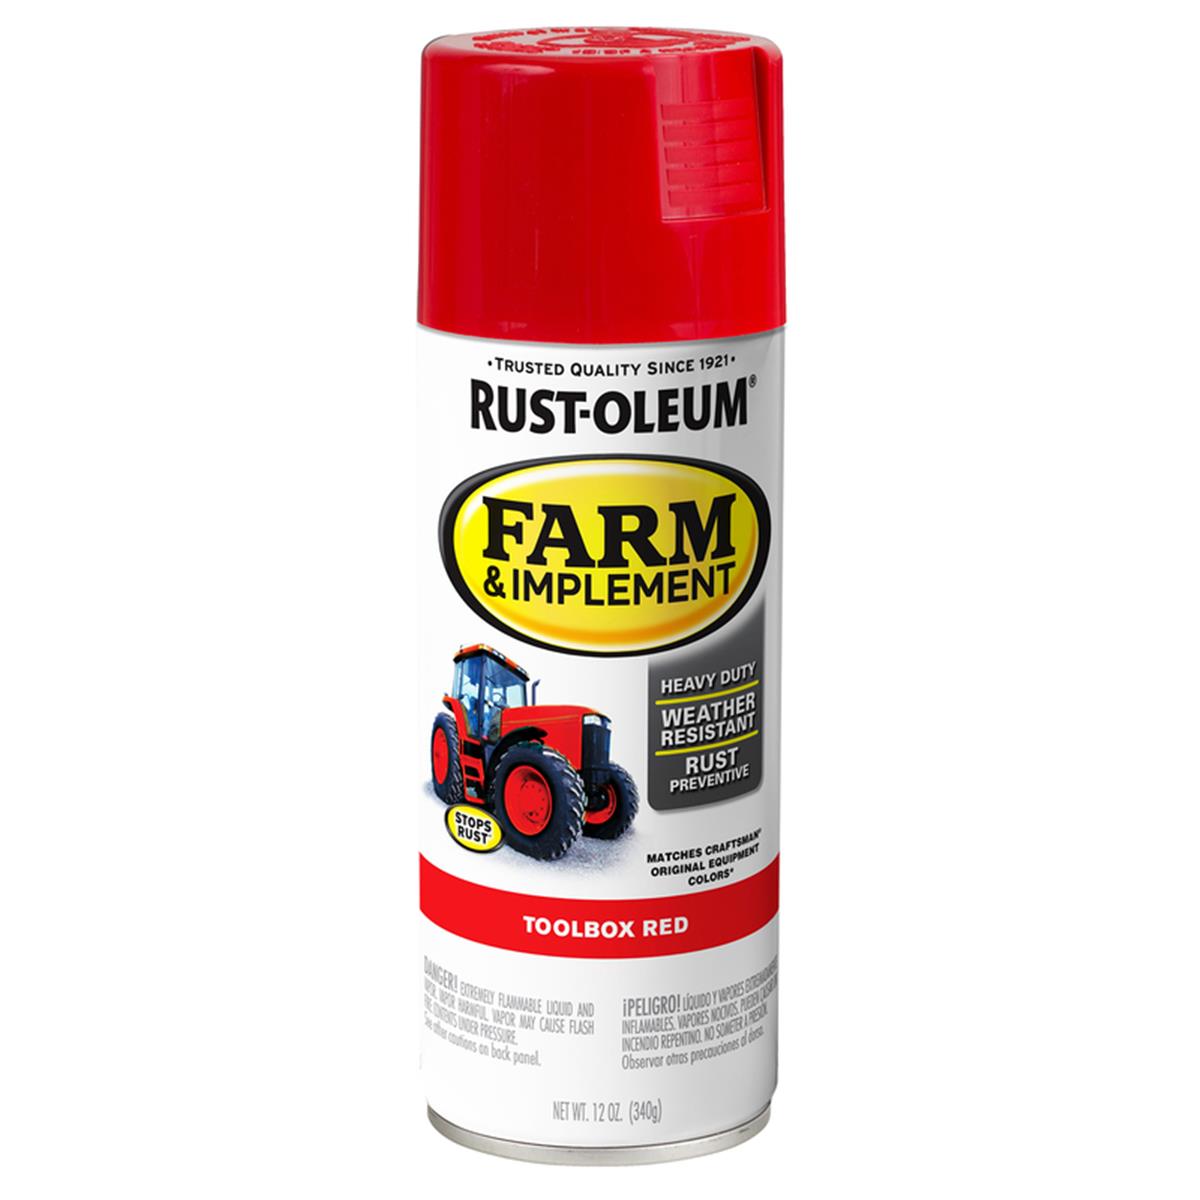 1002816 Farm & Implement Indoor & Outdoor Gloss Toolbox Red Oil-based Enamel Rust Prevention Paint - Case Of 6